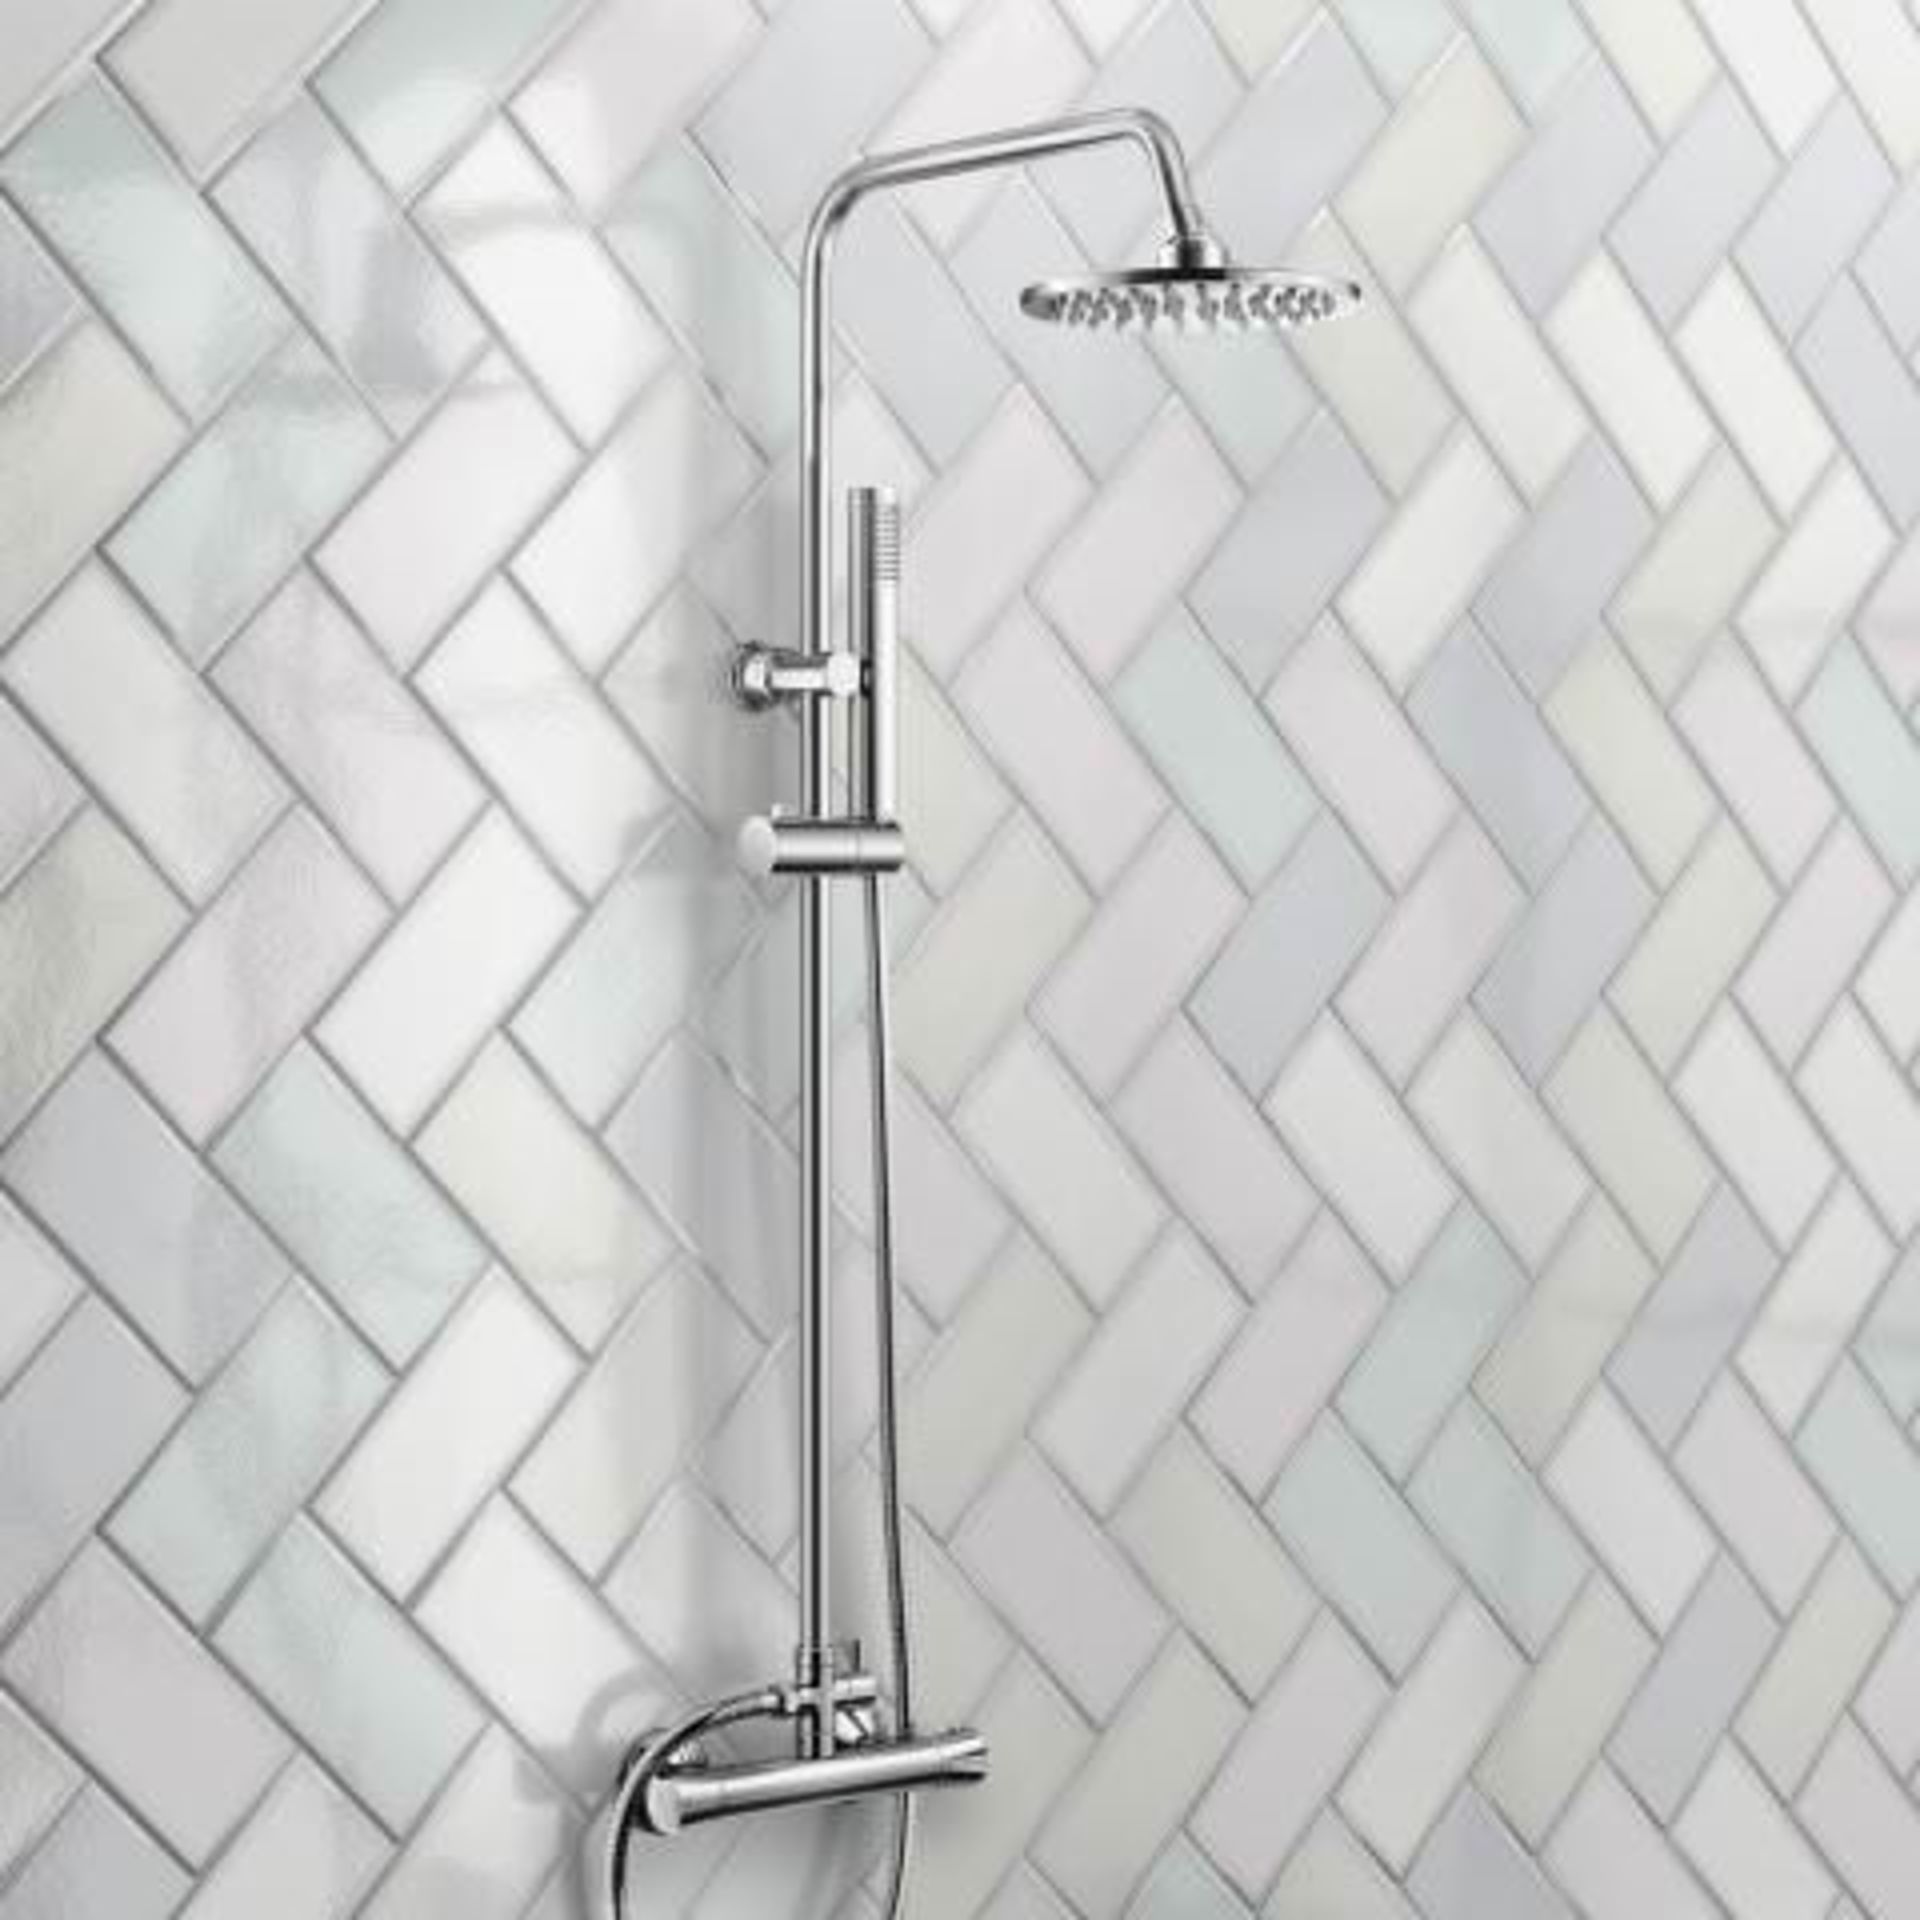 (N16) 200mm Round Head Thermostatic Exposed Shower Kit & Hand Held. RRP £299.99. Simplistic Style - Image 5 of 5